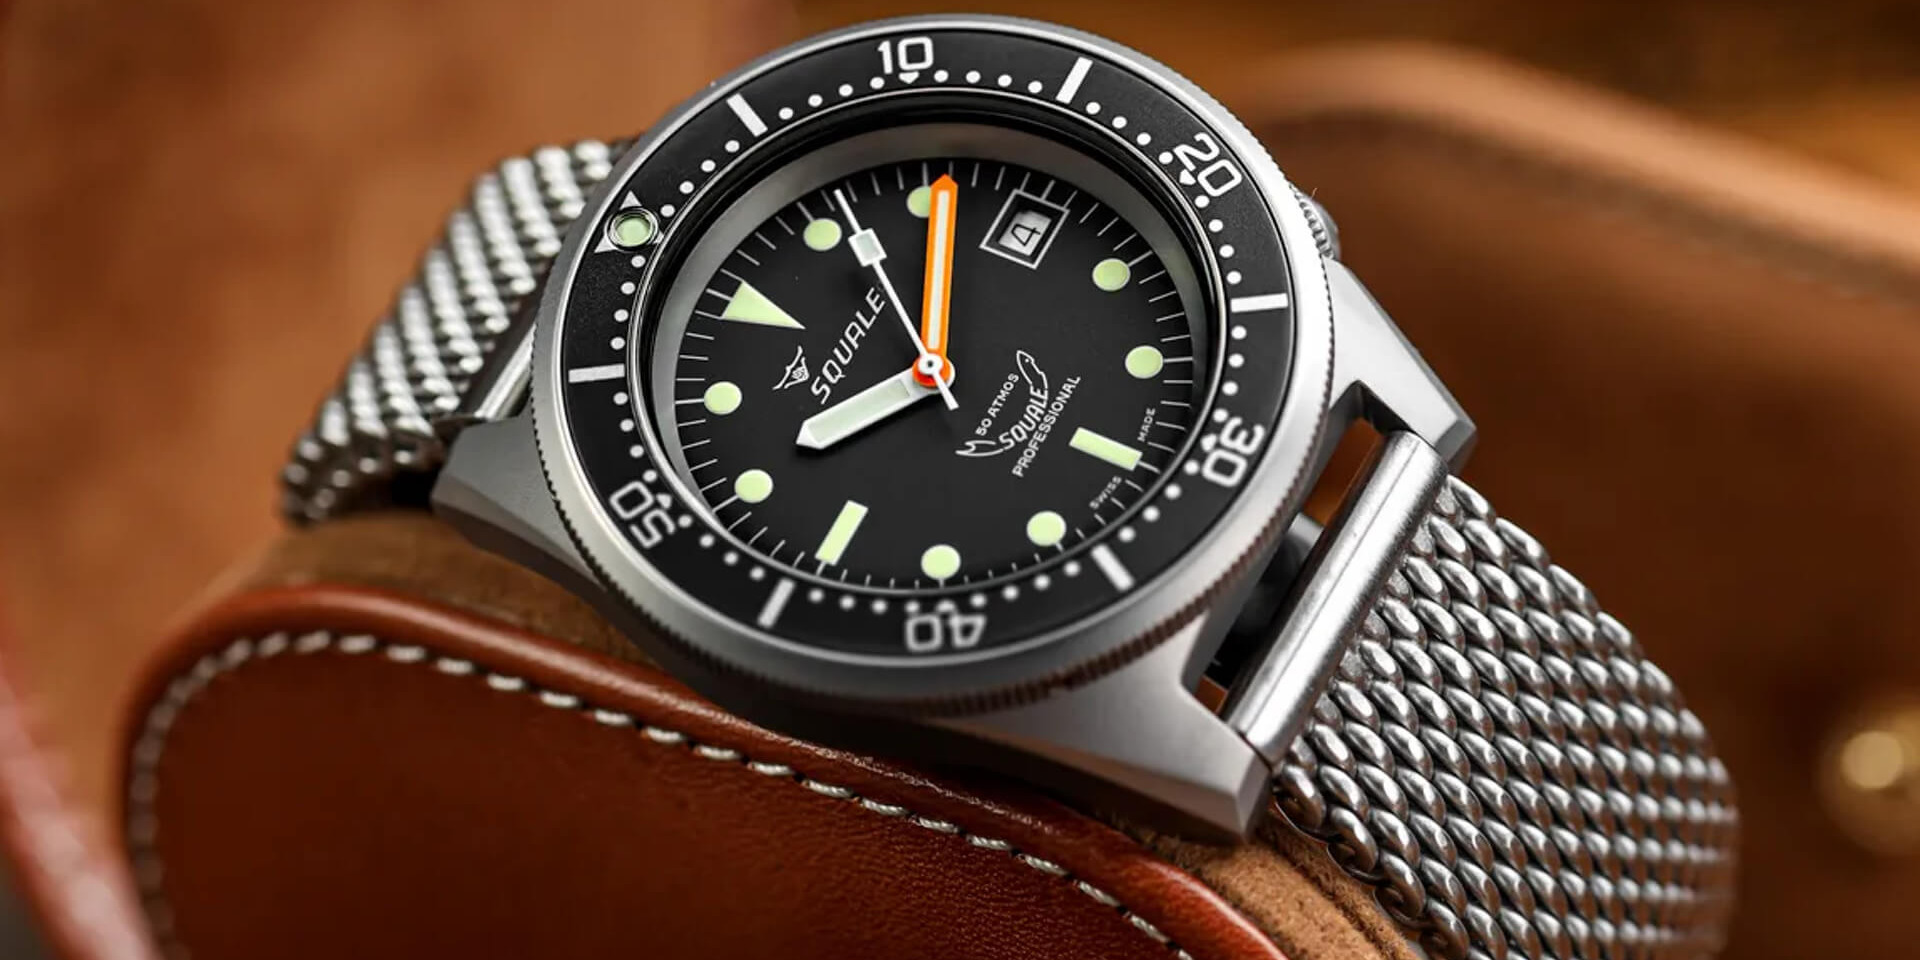 The Swiss Shark Among Diving Watches